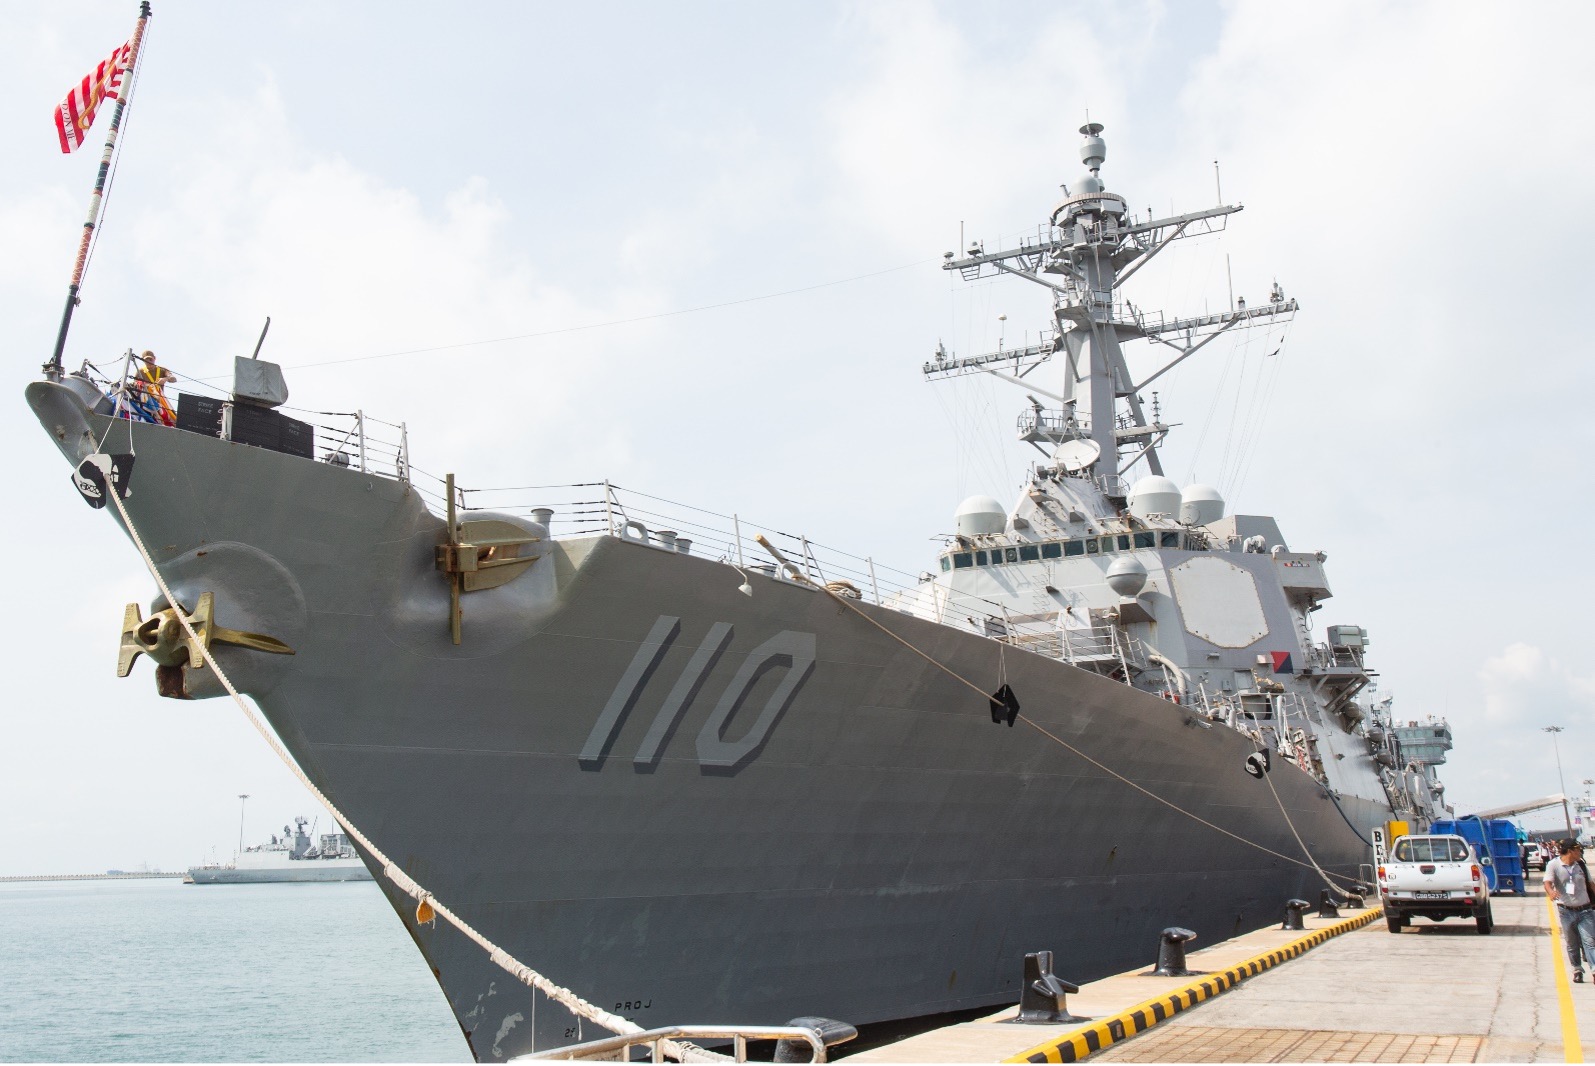 IMDEX Asia 2023 makes a roaring comeback after a four-year hiatus, with a strong exhibitor line-up, warship displays, engaging strategic conference and seminars as well as an innovation-focused platform.